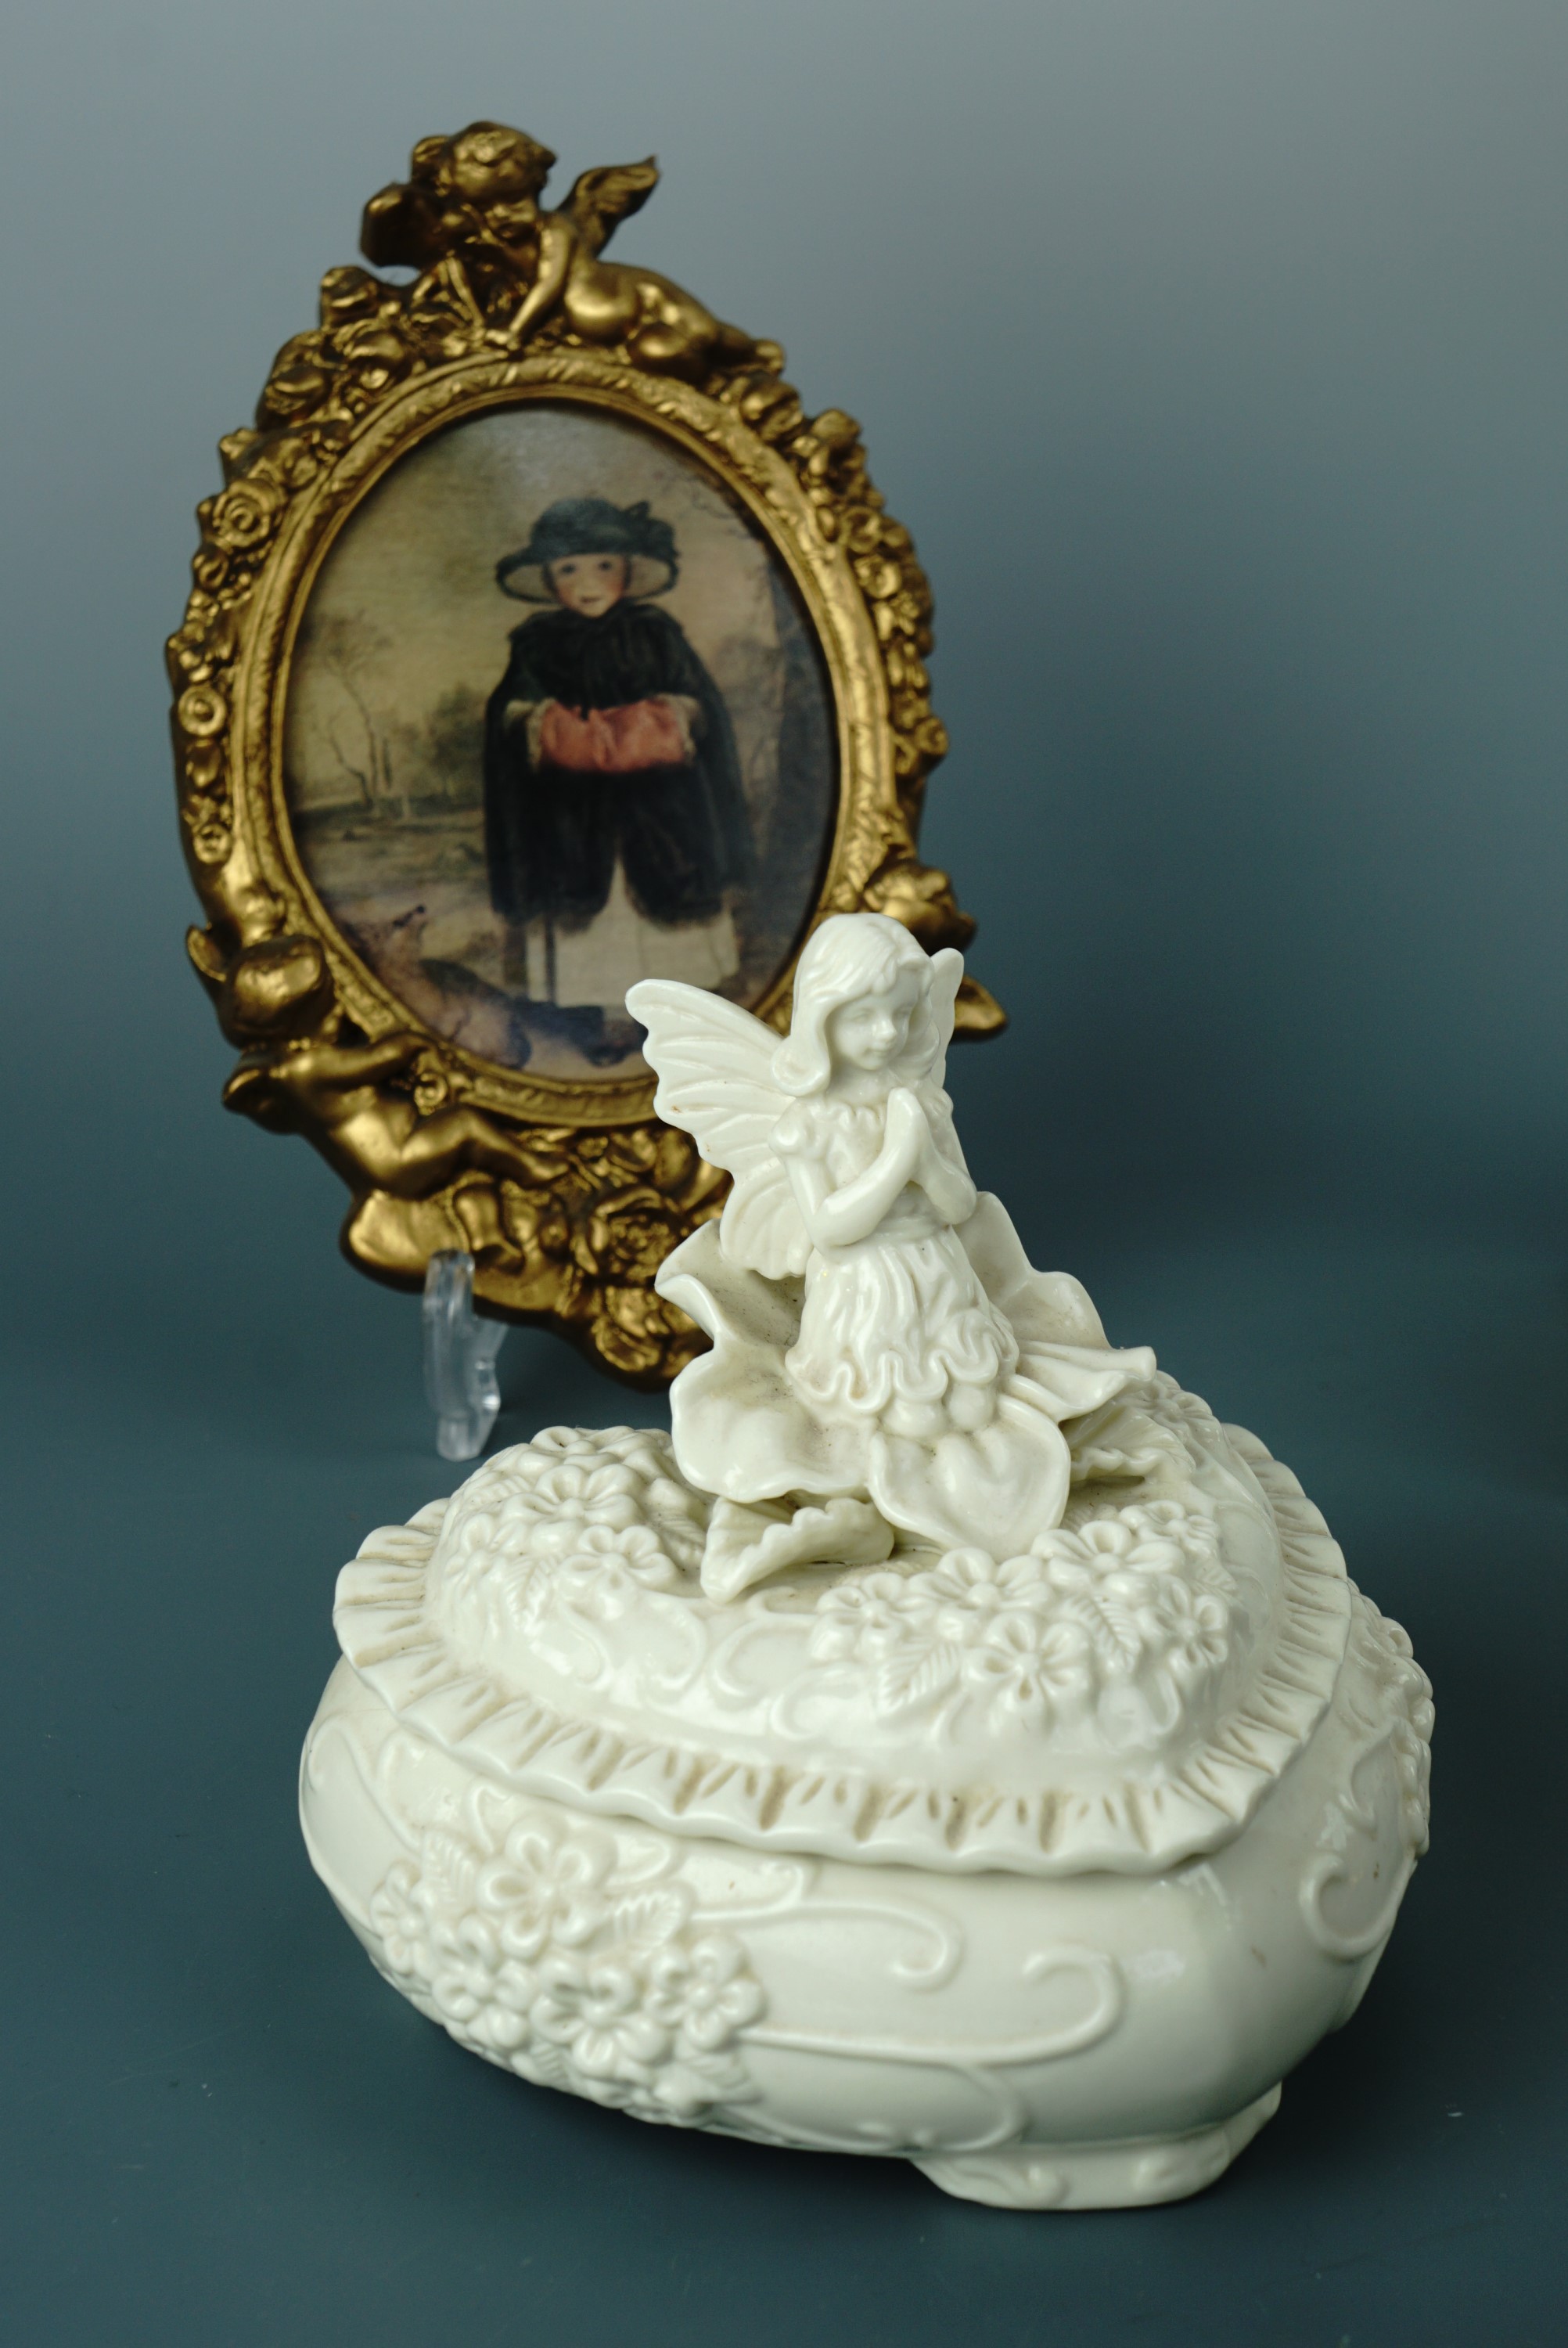 Contemporary decorative furnishing items including a reproduction classical bust, portrait - Image 4 of 5